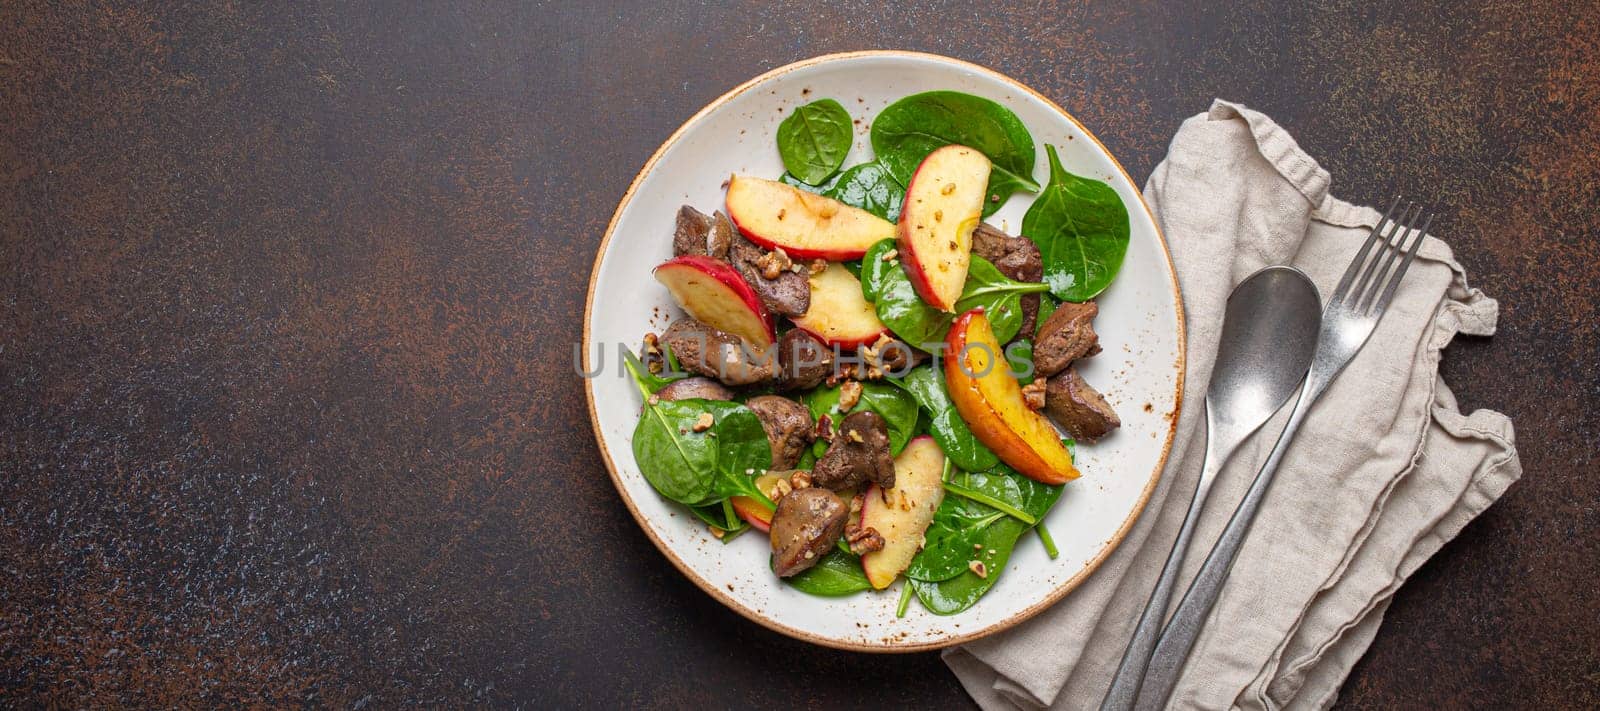 Healthy Salad with Iron Rich Ingredients Chicken Liver, Apples, Fresh Spinach and Walnuts on White Ceramic Plate, Dark Brown Rustic Stone Background Top View Copy Space.